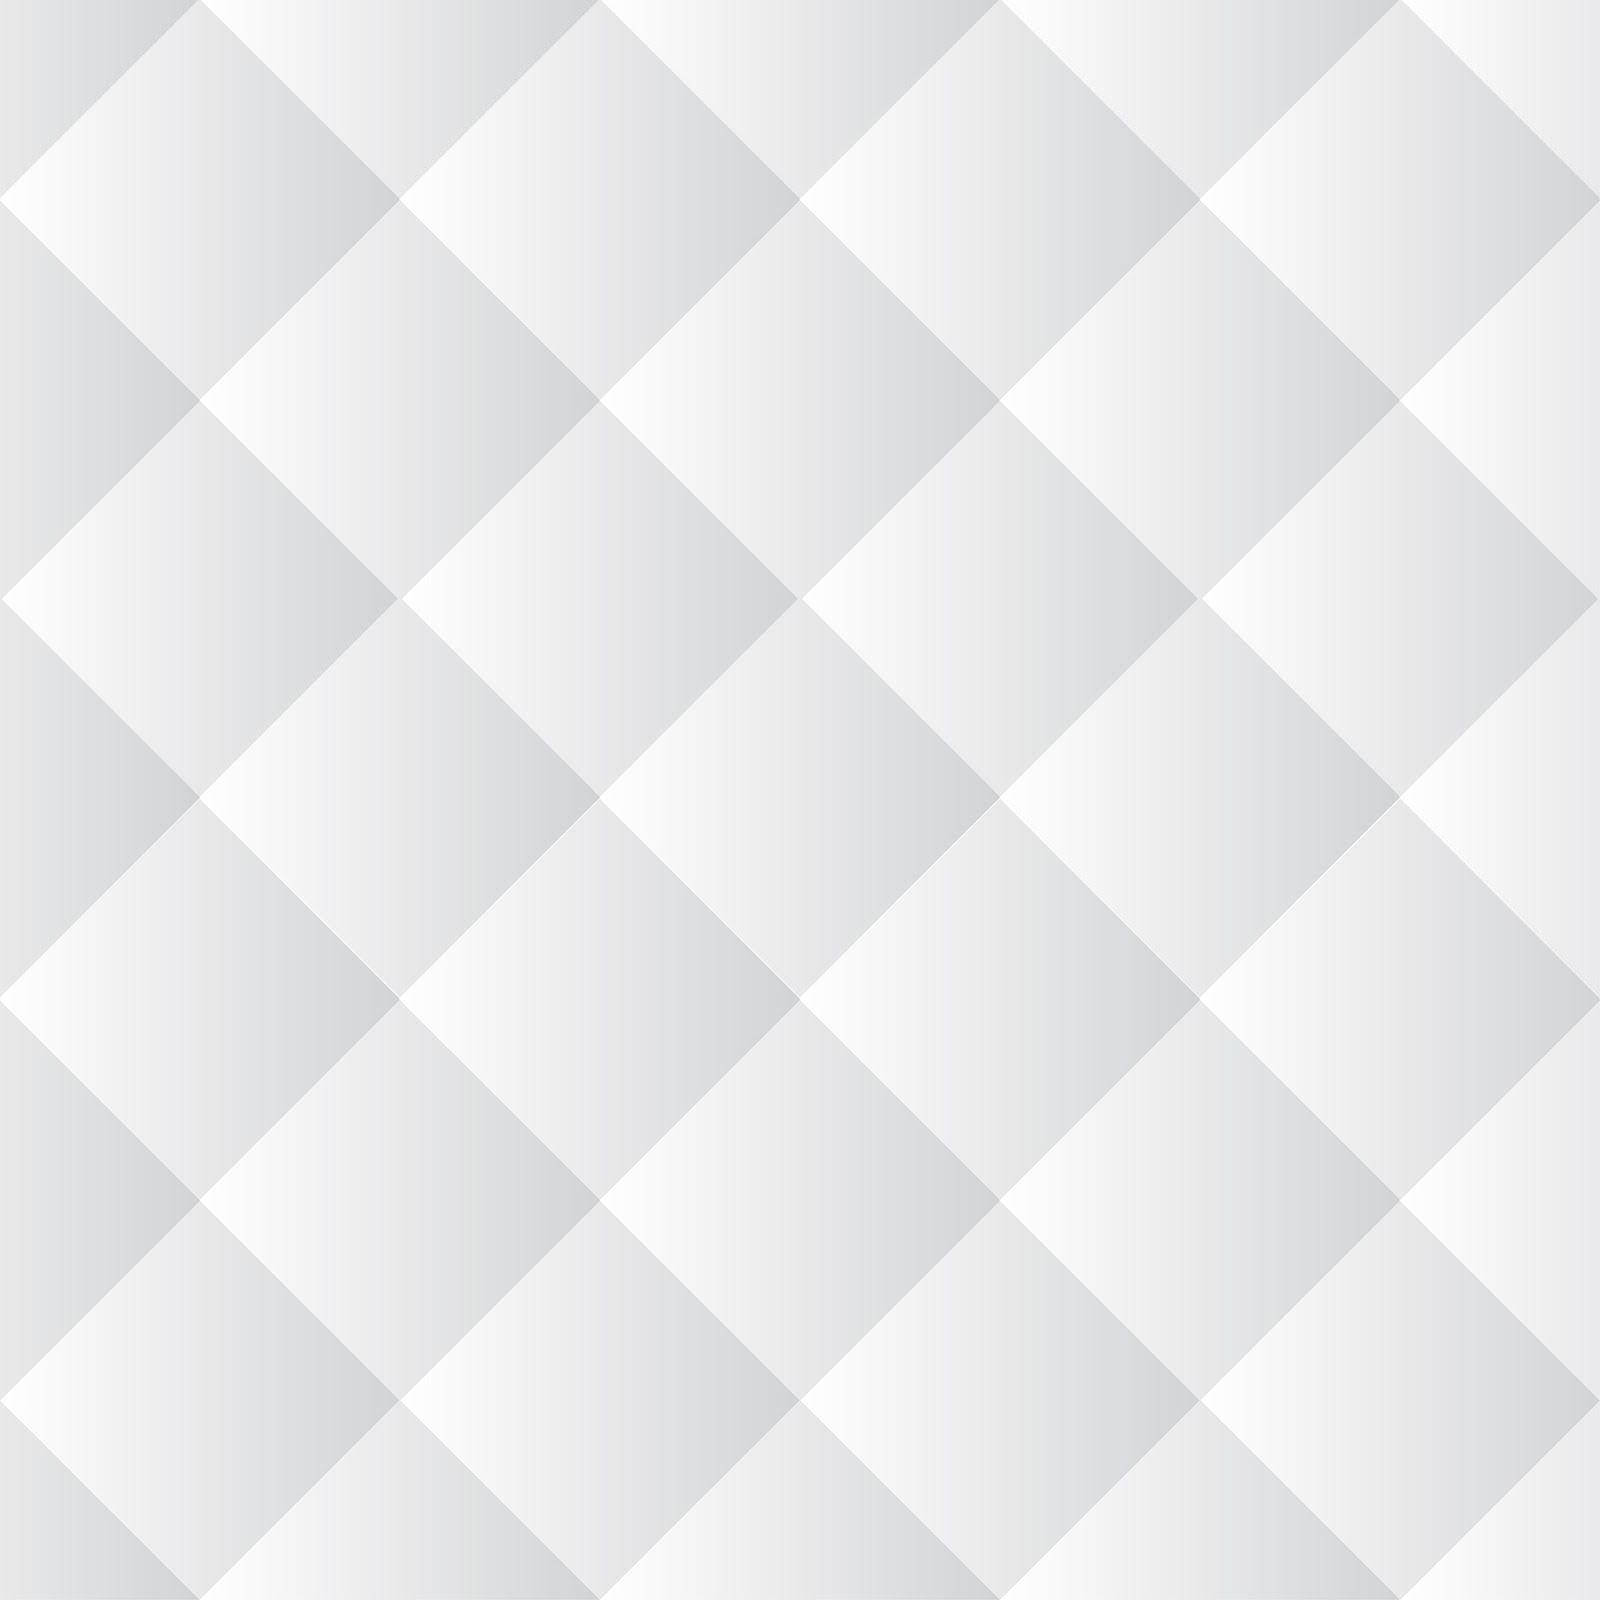 Diamond Pattern iPhone Wallpapers Free Download